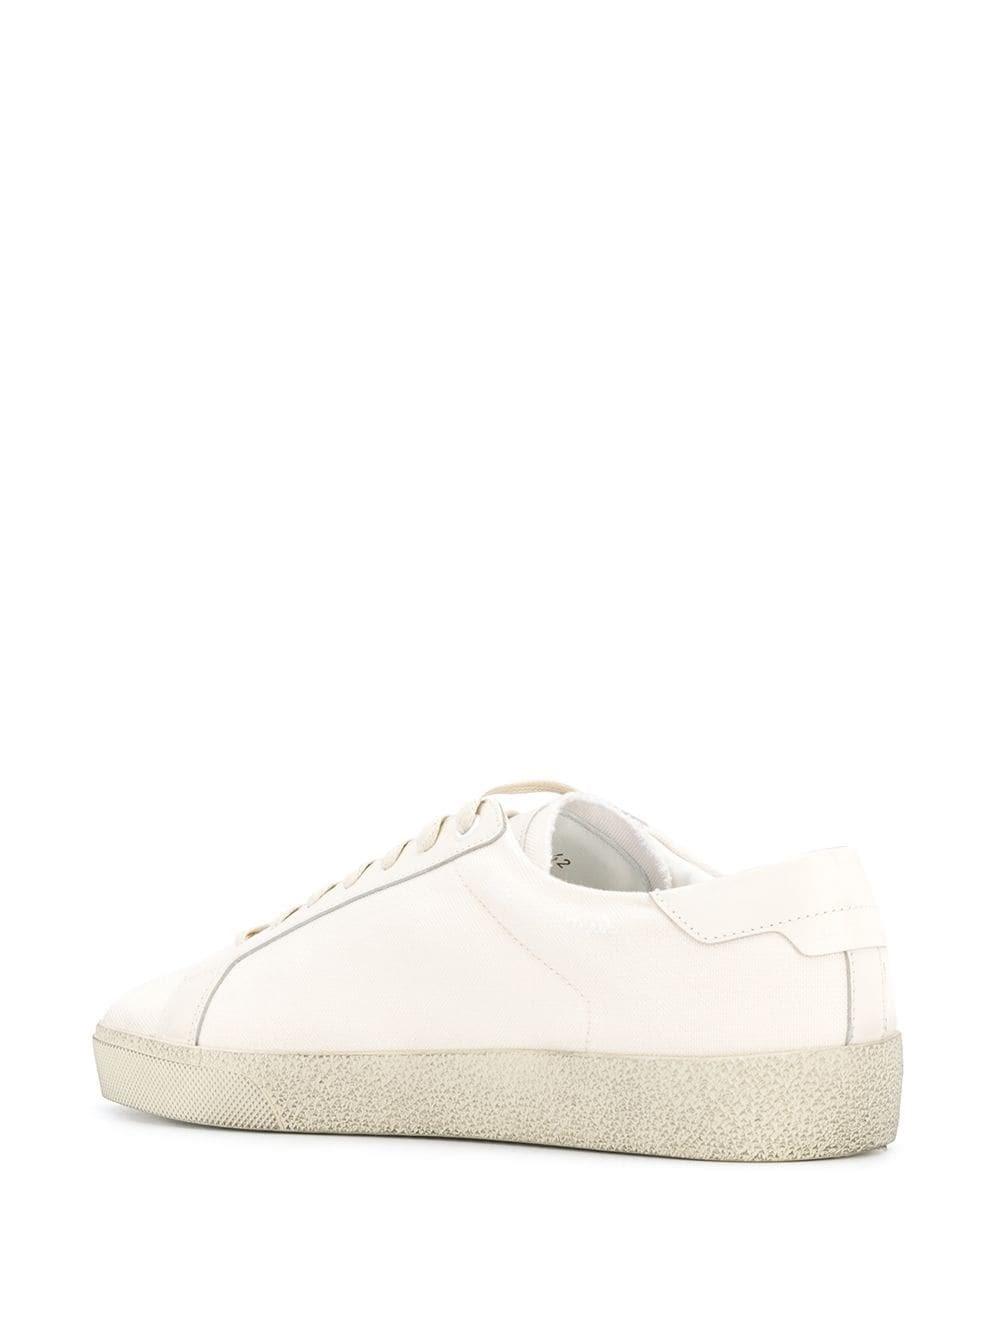 Saint Laurent Leather Sneakers in White for Men - Lyst